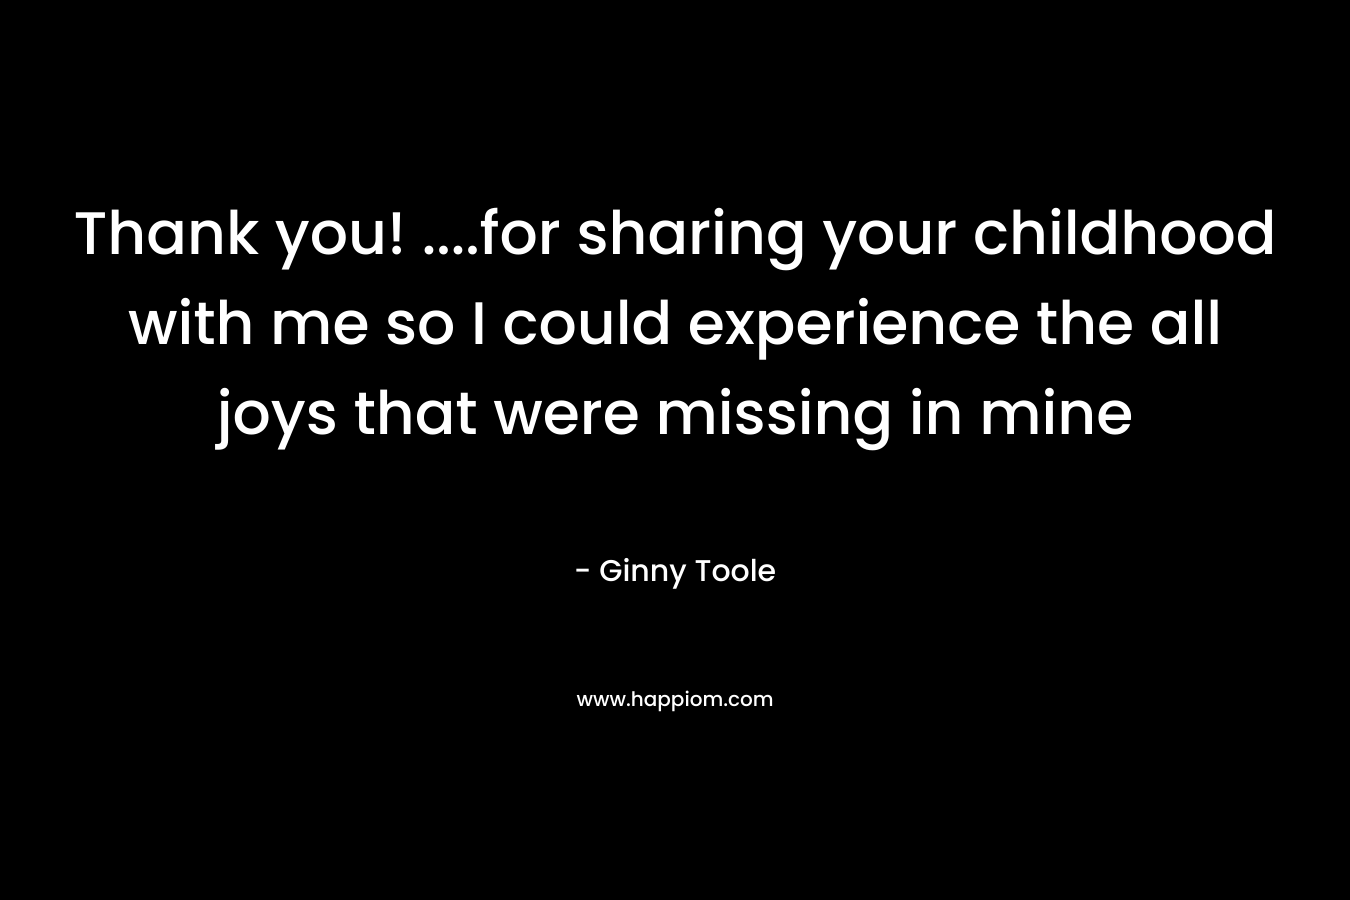 Thank you! ….for sharing your childhood with me so I could experience the all joys that were missing in mine – Ginny Toole